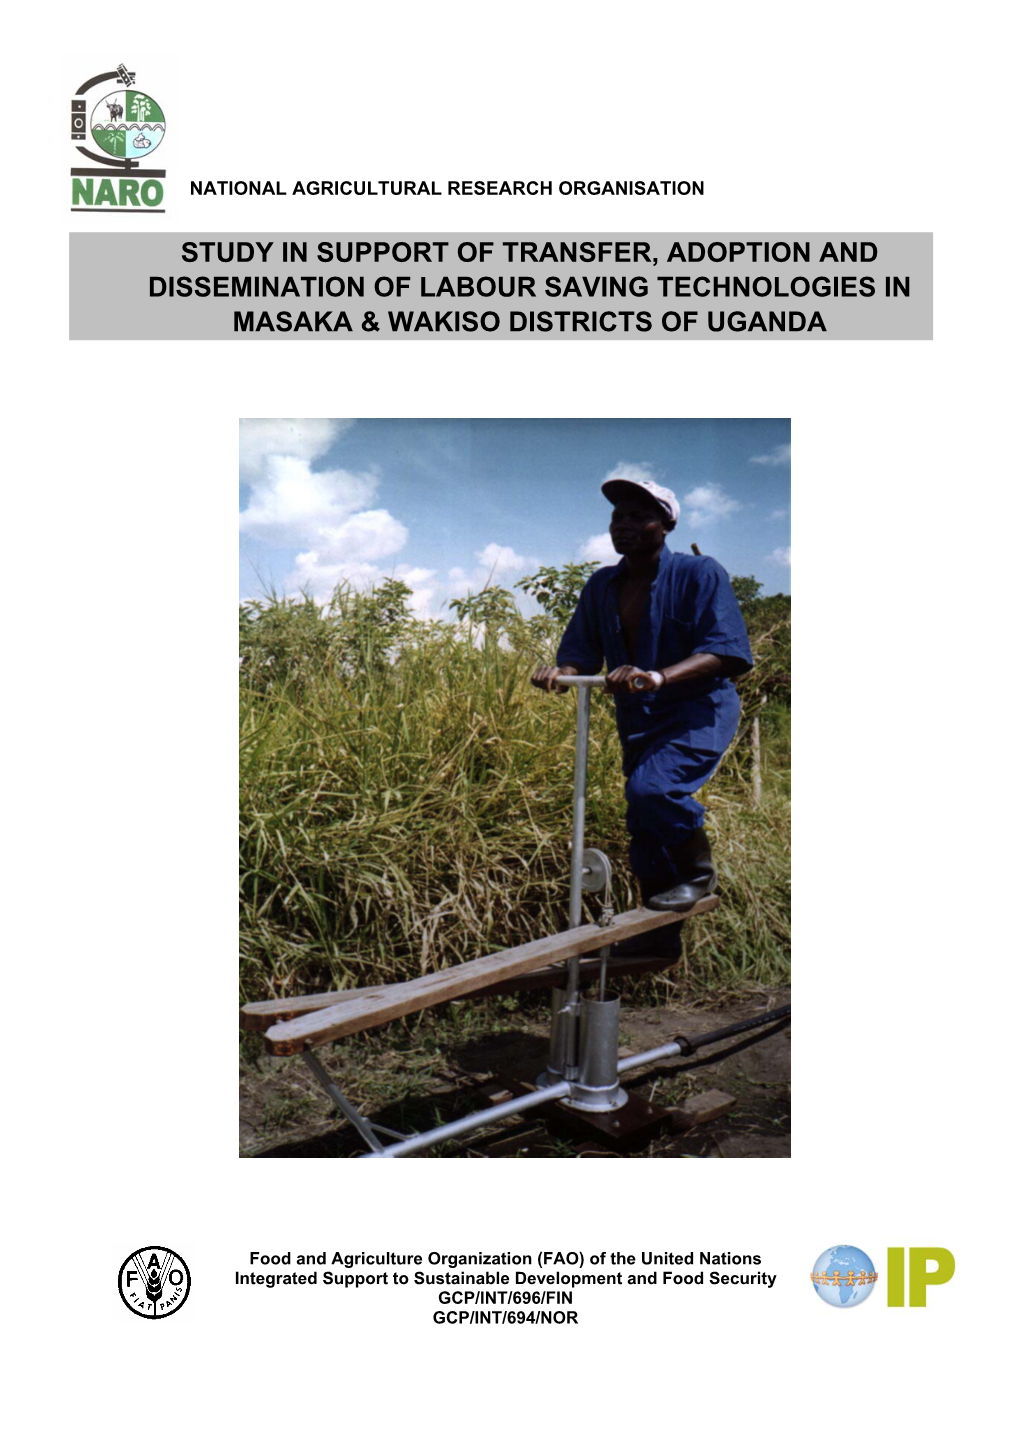 Study in Support of Transfer, Adoption and Dissemination of Labour Saving Technologies in Masaka & Wakiso Districts of Uganda